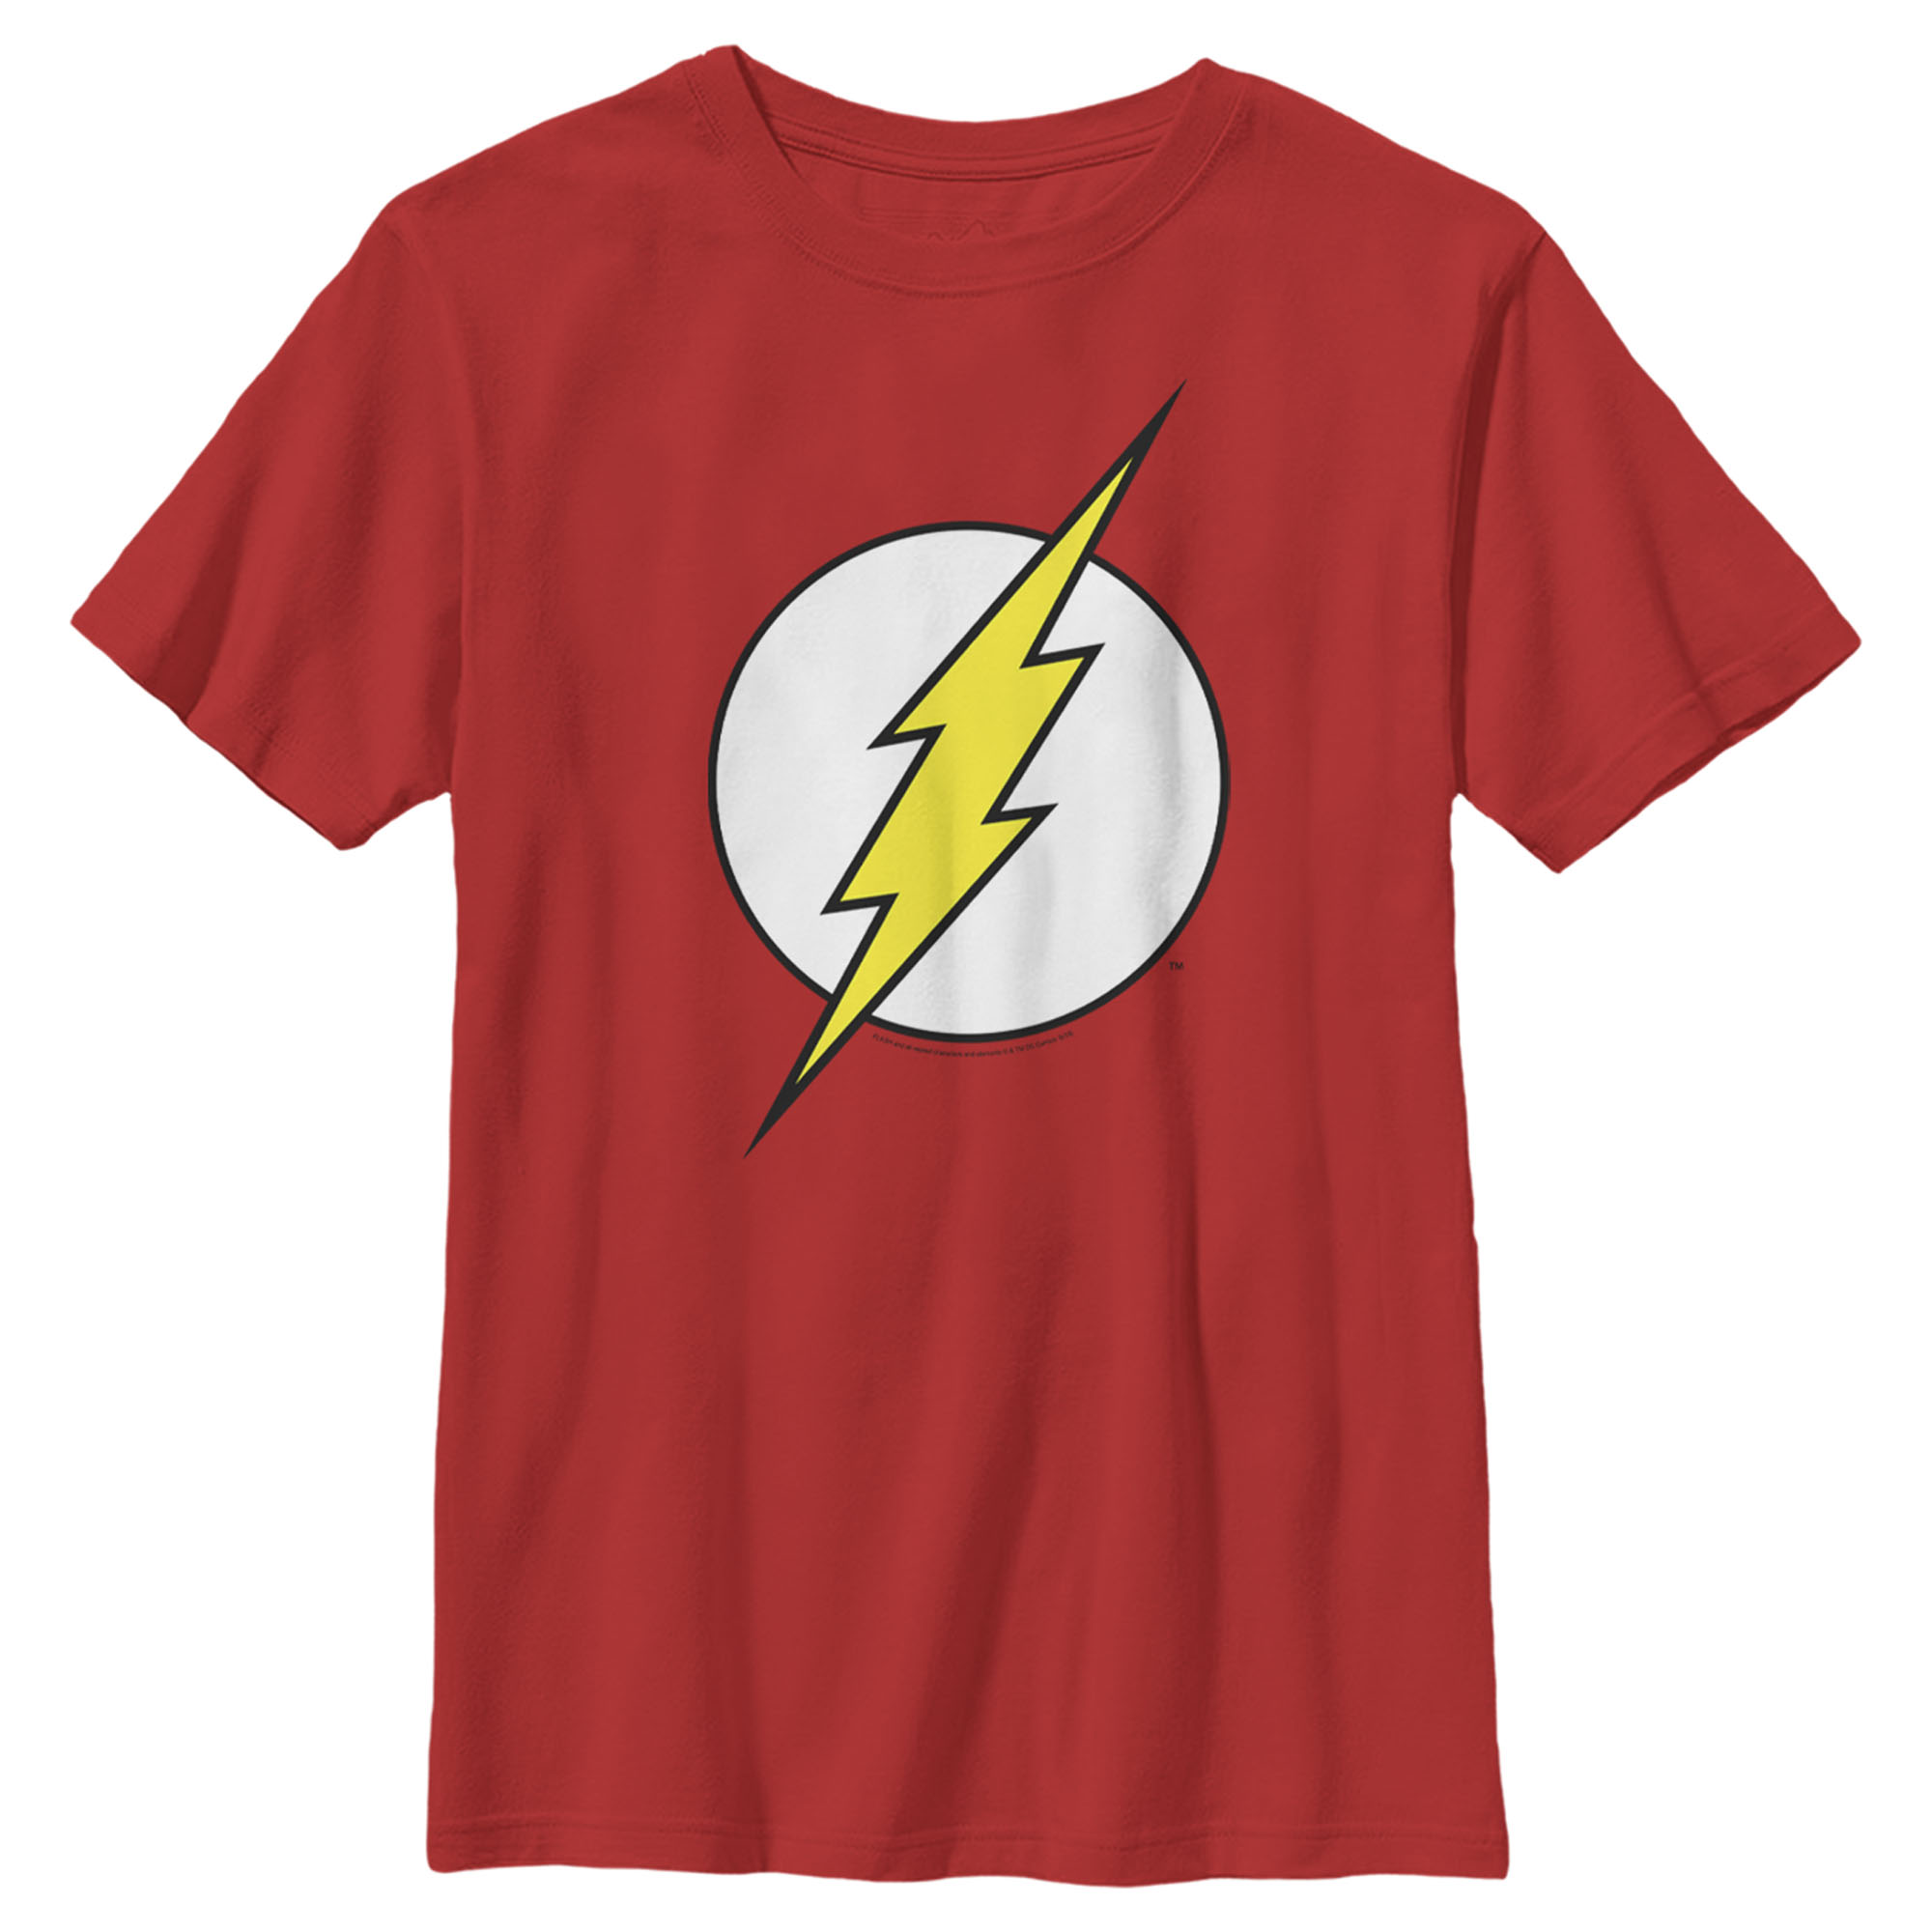 Boy's The Flash Classic Logo  Graphic Tee Red X Large - image 1 of 3